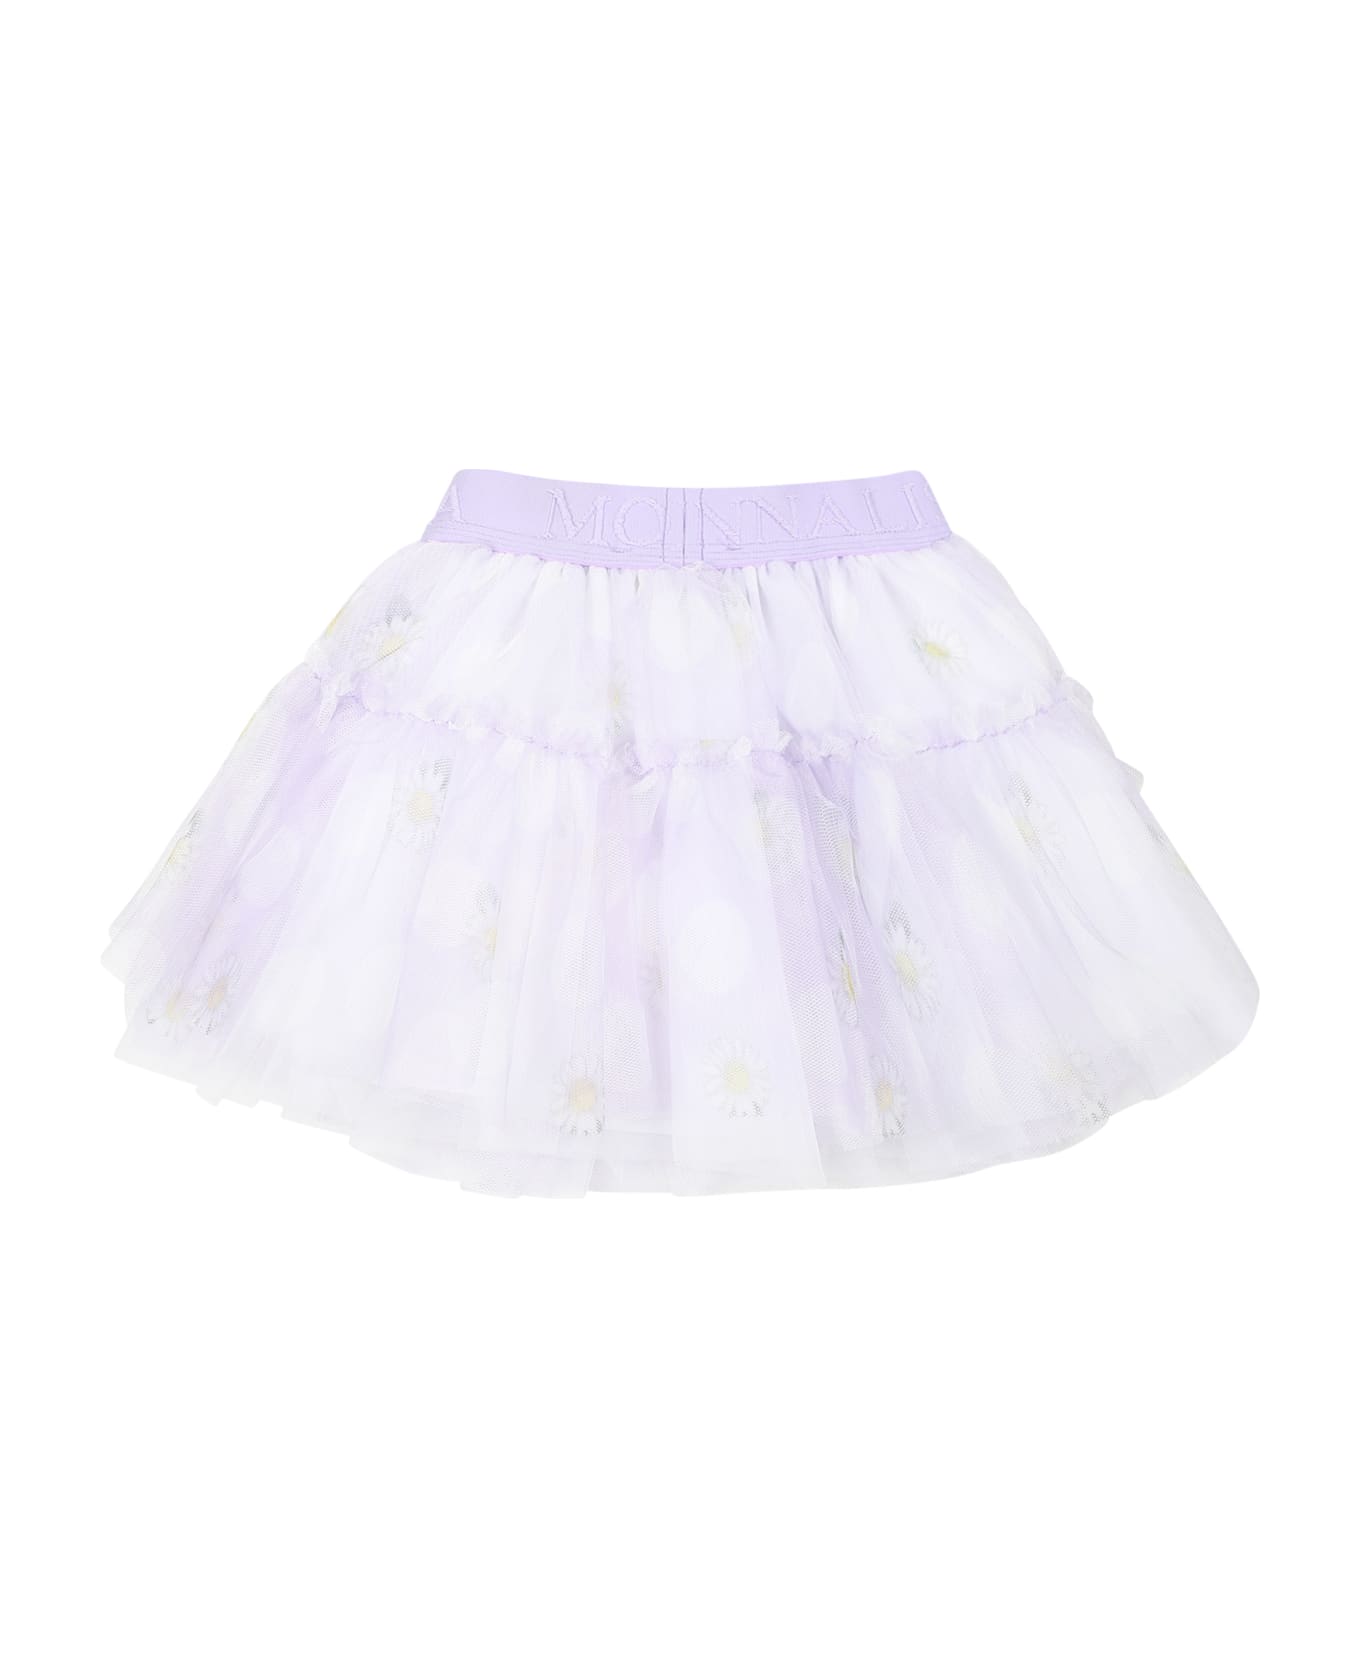 Monnalisa Purple Skirt For Baby Girl With Daisy Print - Violet ボトムス